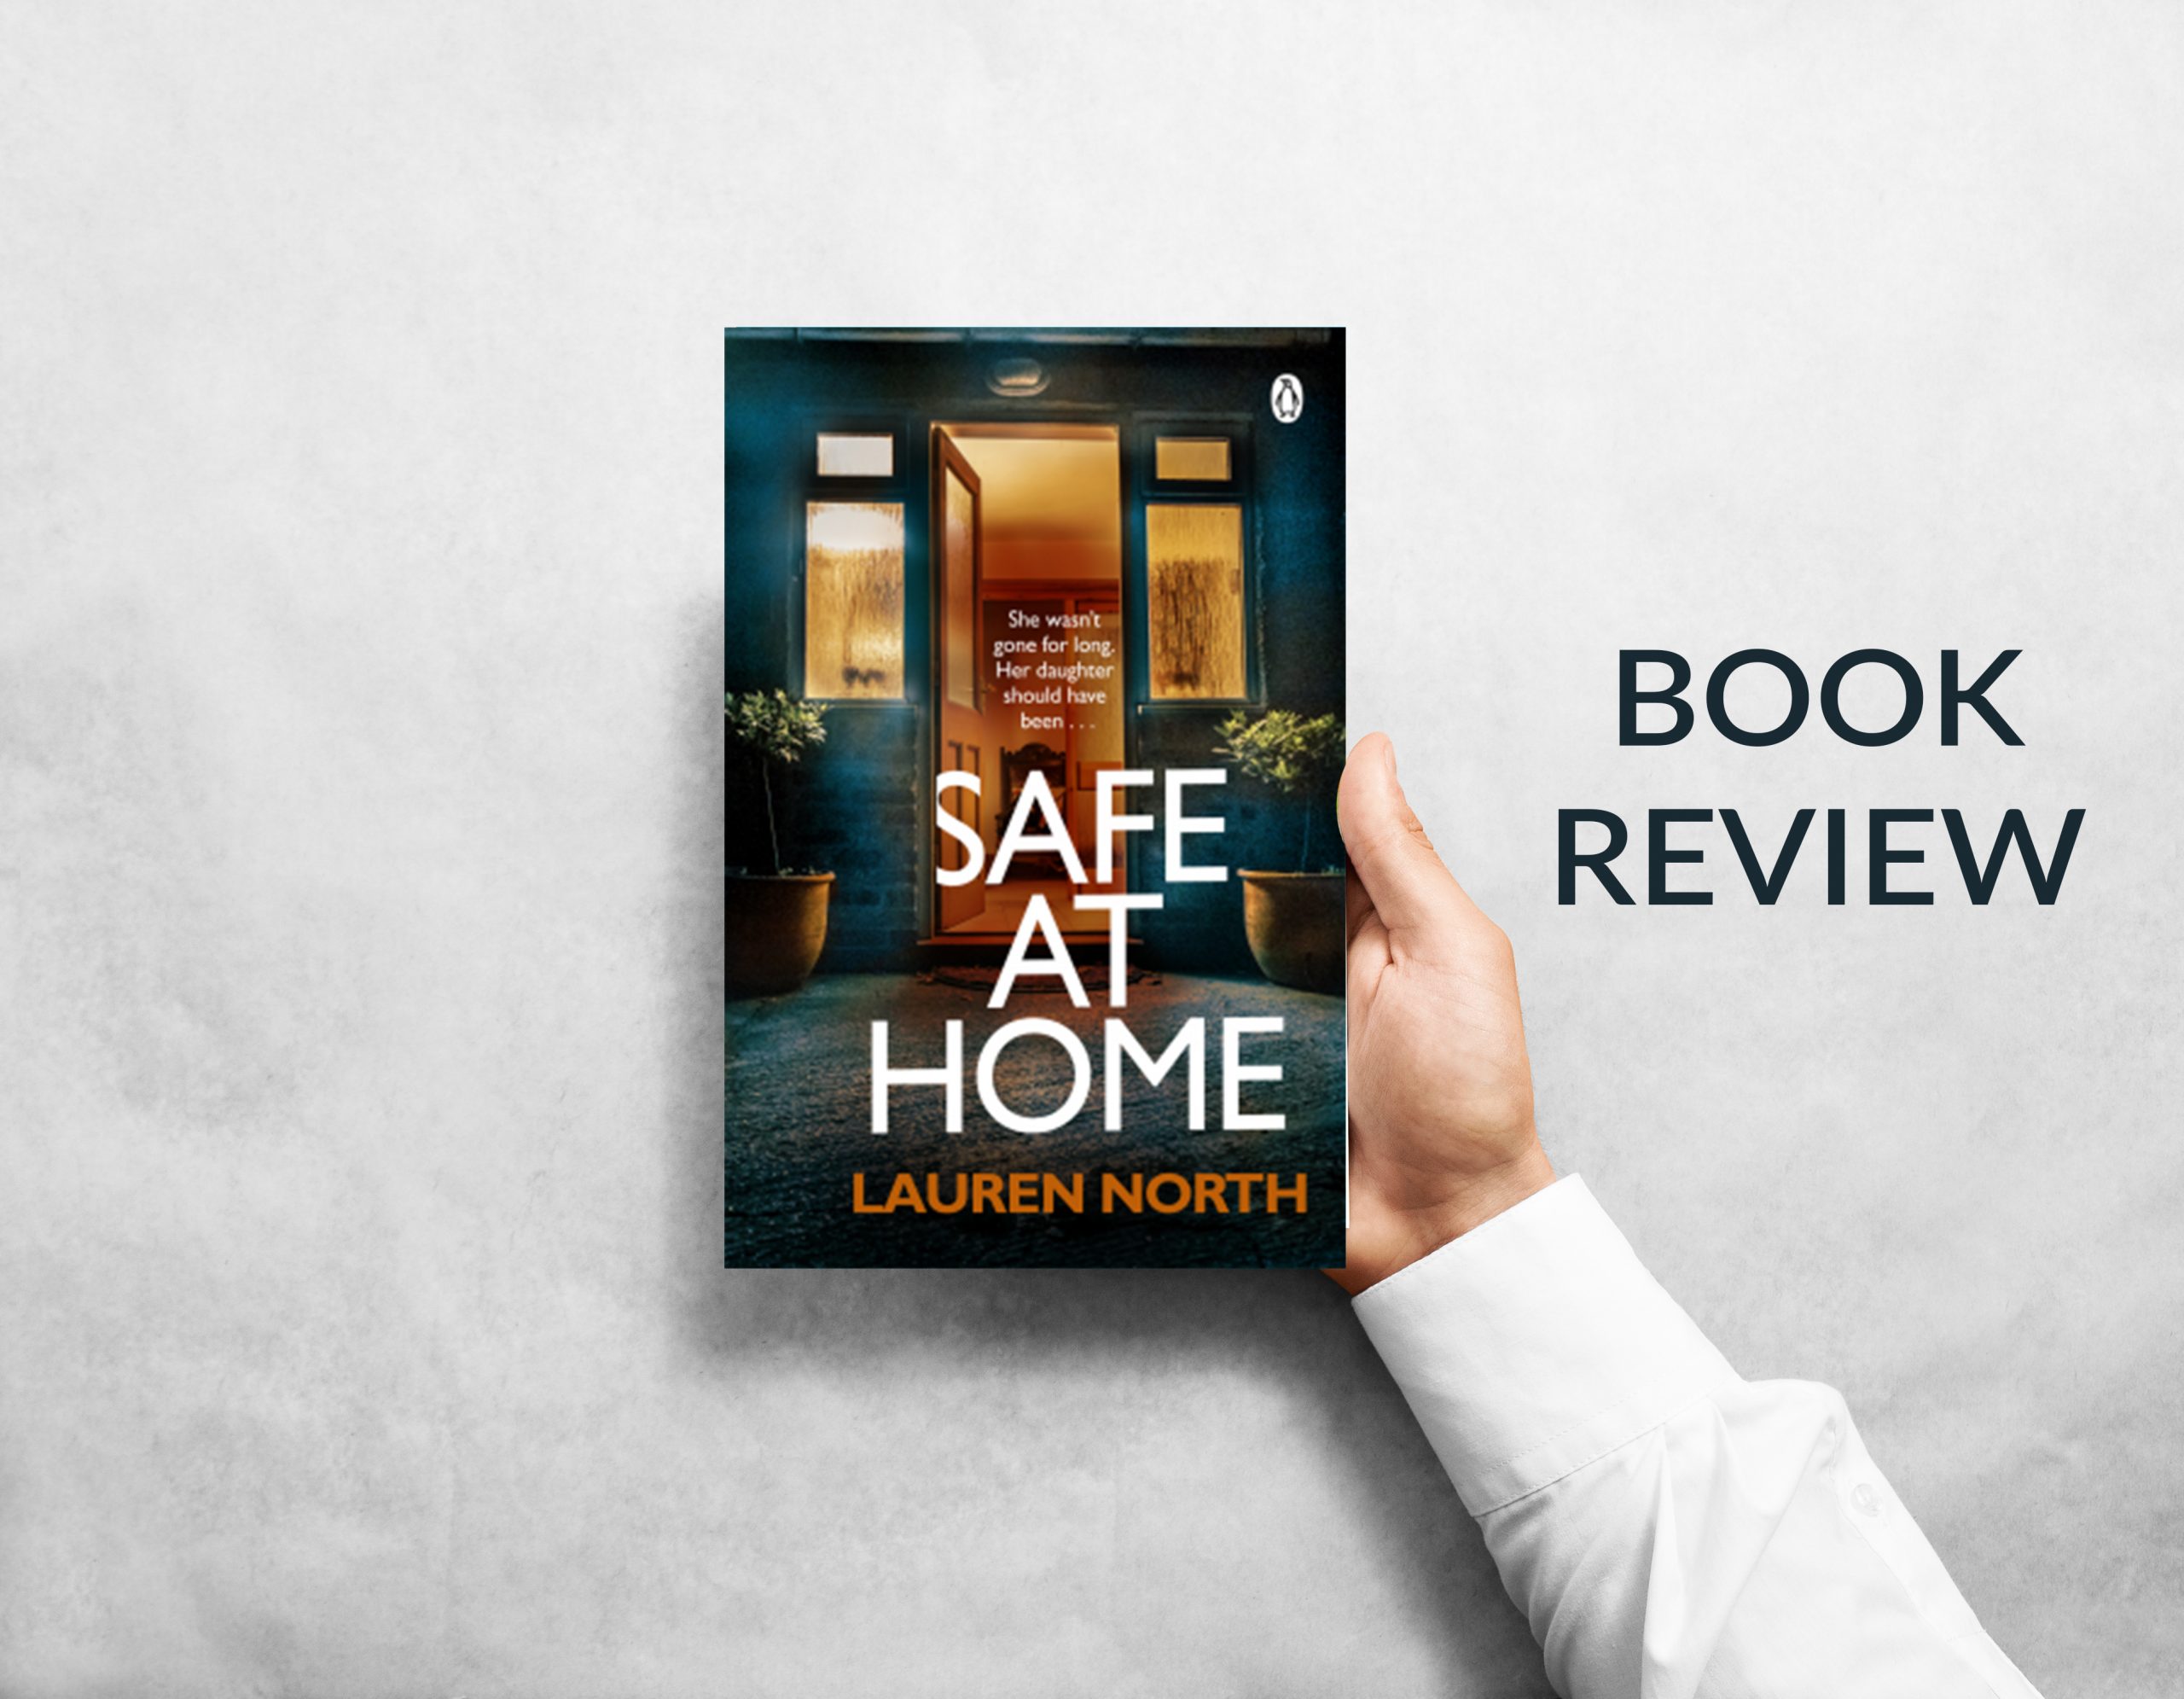 Safe at home by Lauren North book review